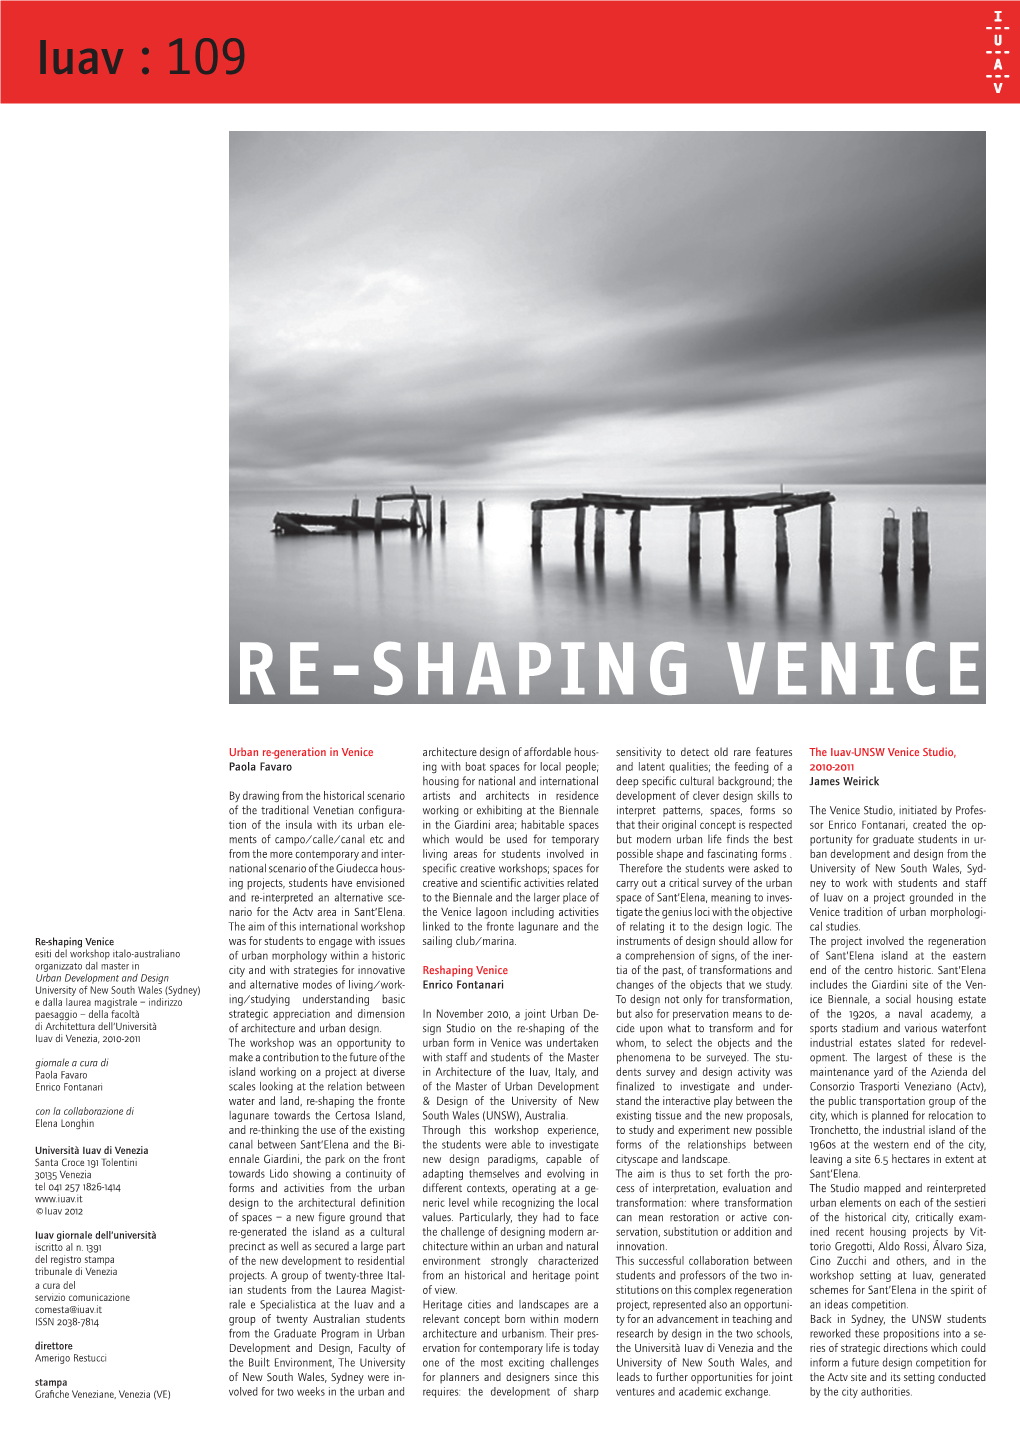 Re-Shaping Venice